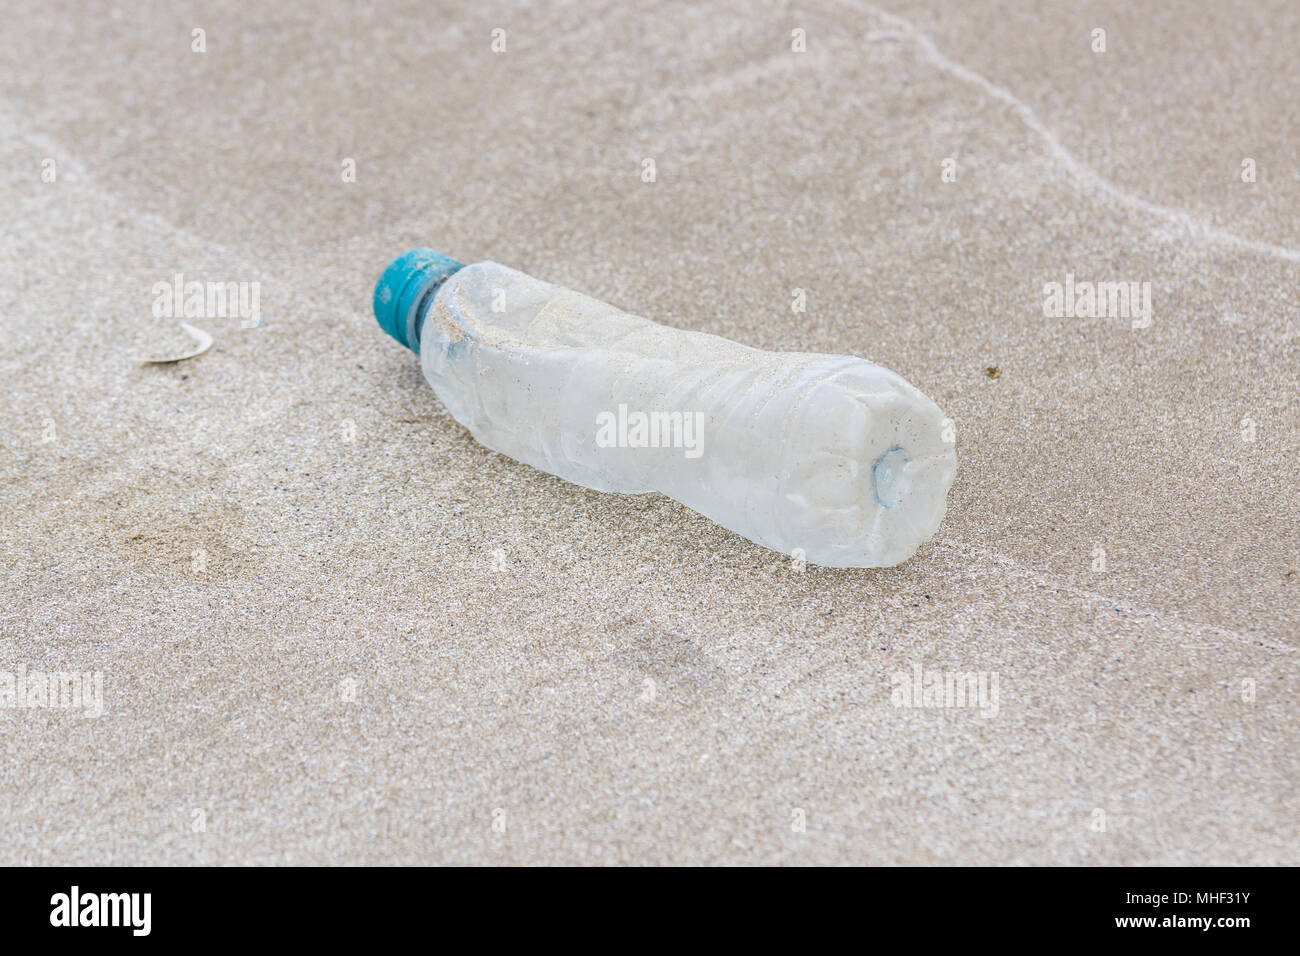 Plastic drink bottle washed up on a sandy beach an example of the many pieces of garbage in the sea around the world Stock Photo